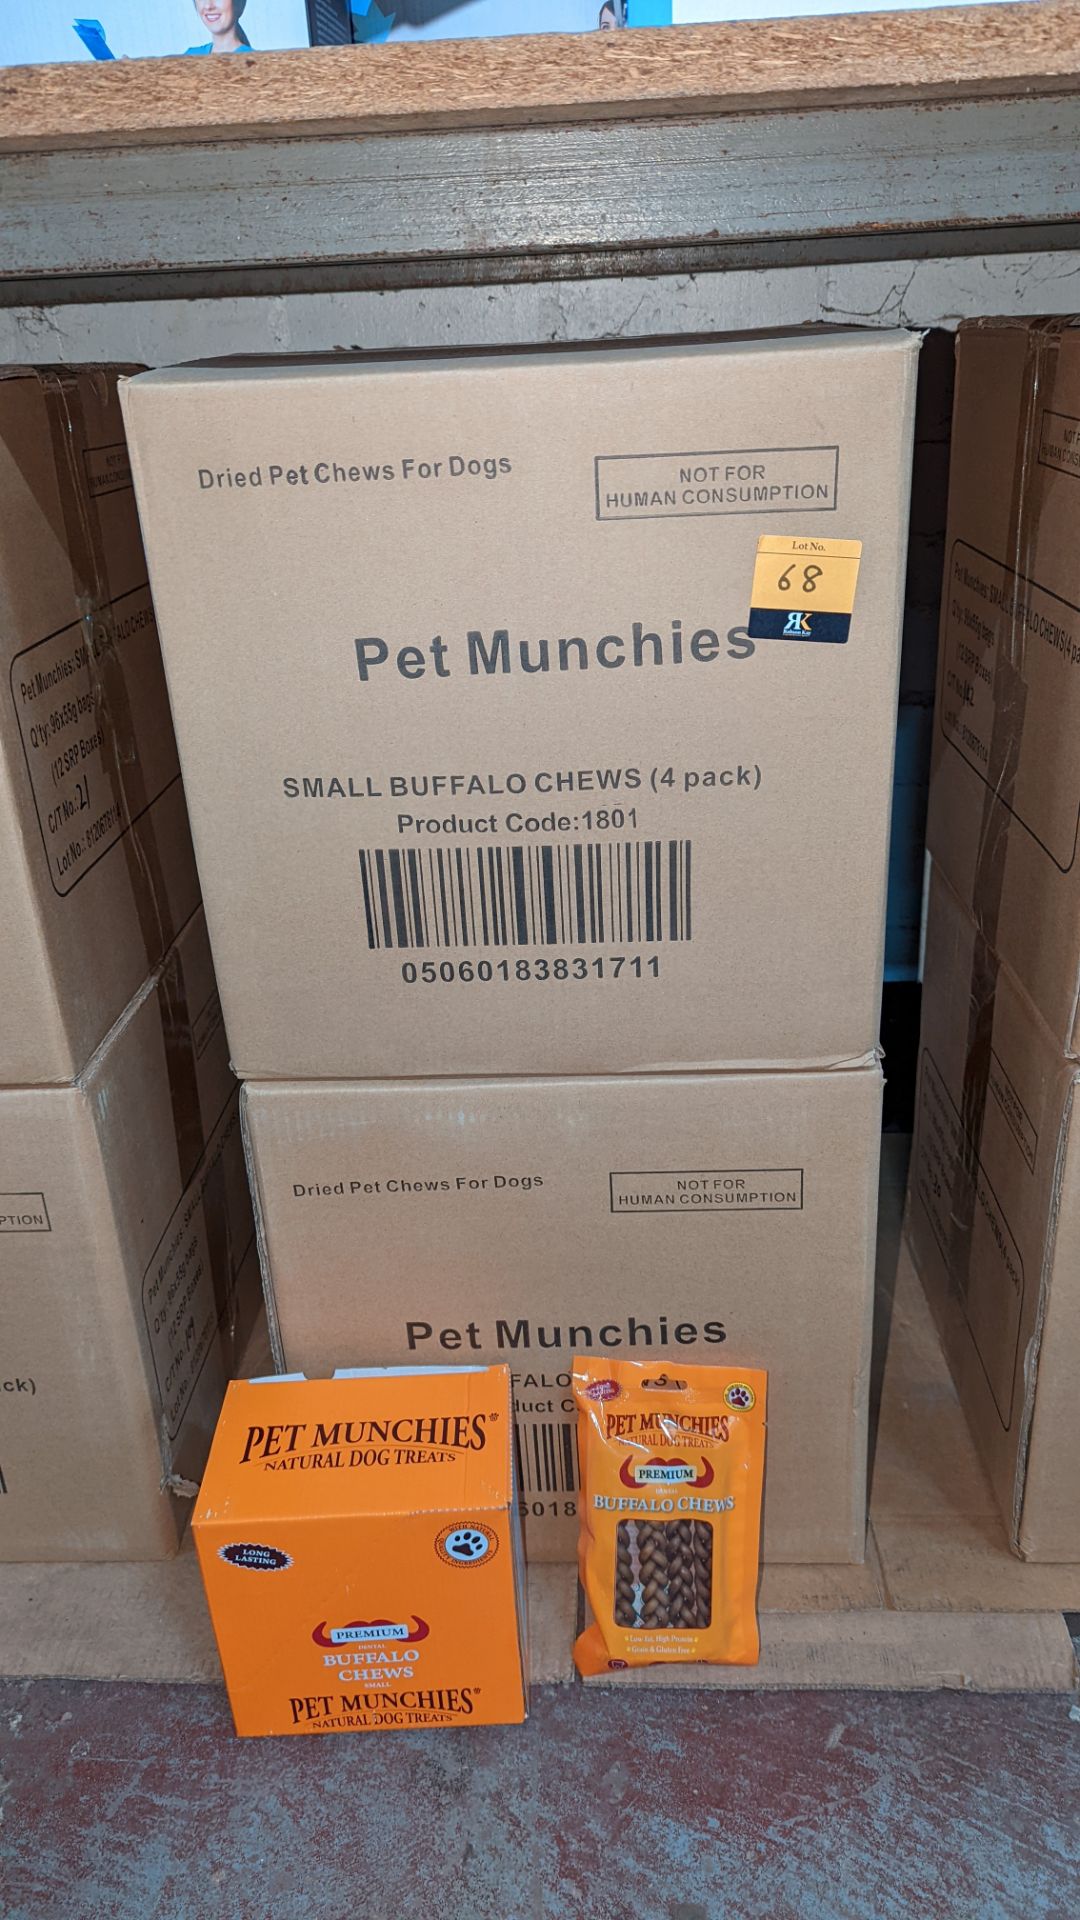 Pet Munchies dried pet chews for dogs. This lot consists of a total of 24 orange retail display box